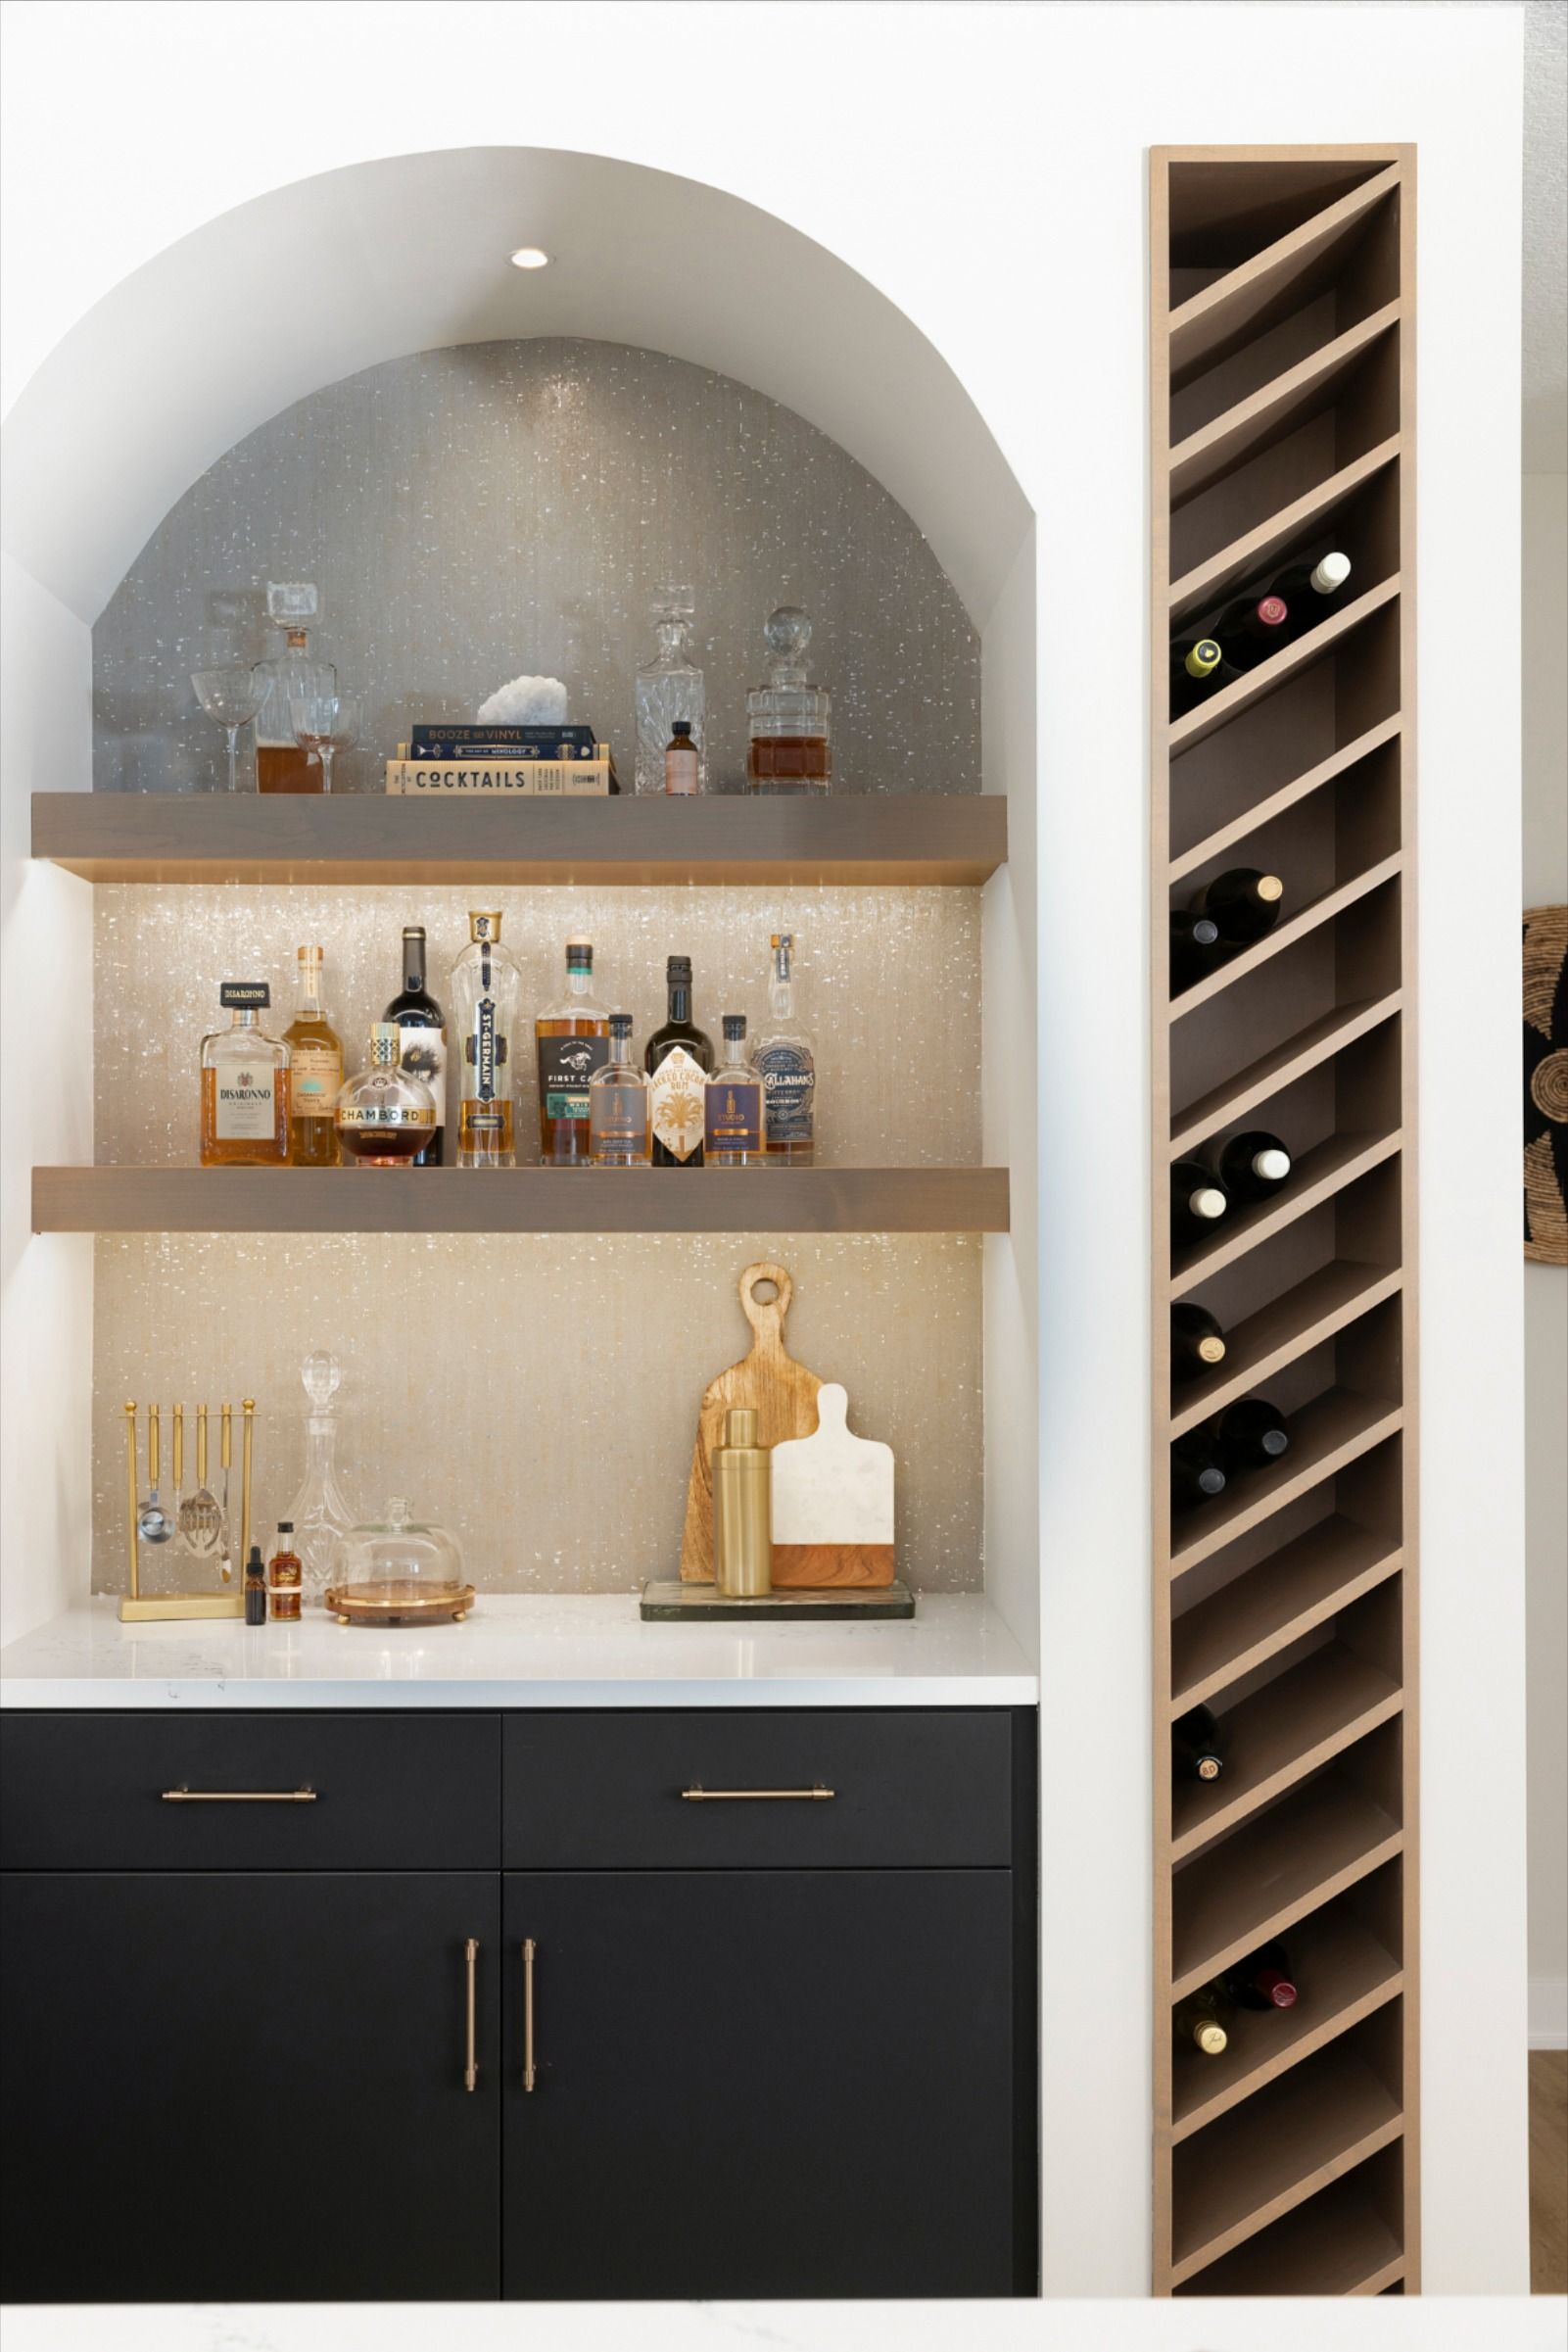 What it takes for a beautiful living room
bar?